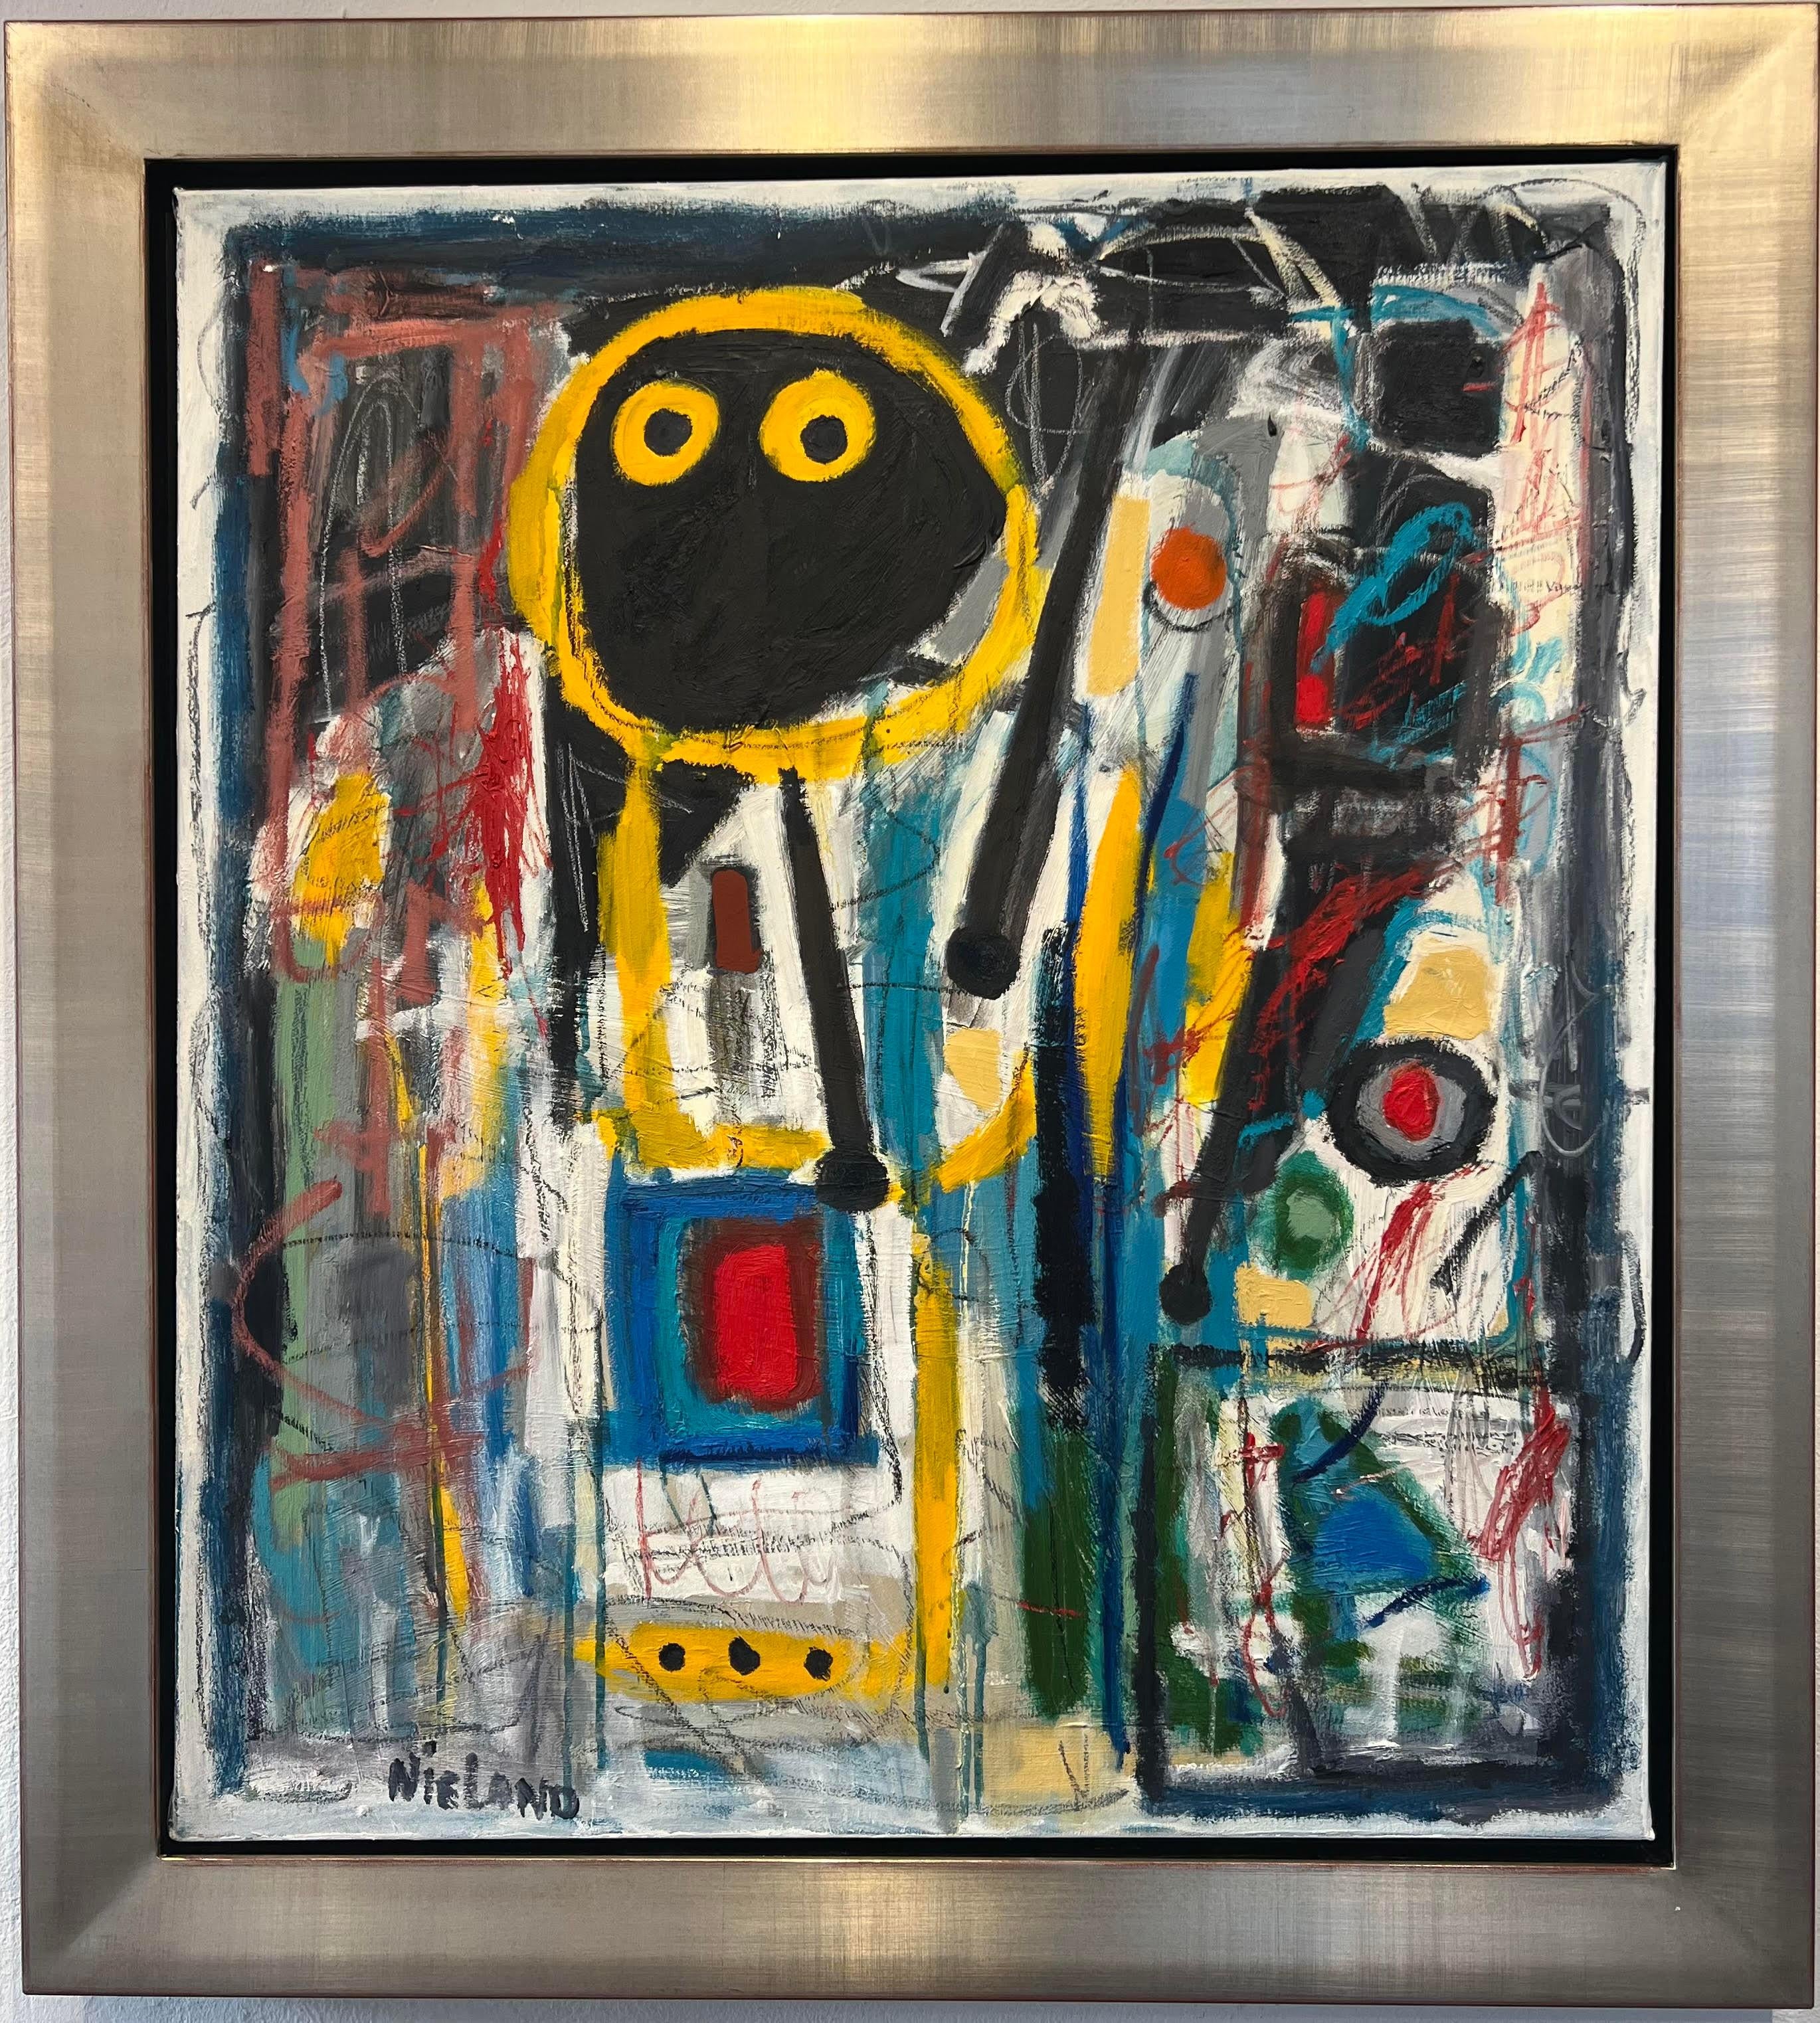 John Nieland Figurative Painting - Hommage a Miro Oil Painting on Canvas Abstract Figurative Colorful In Stock 